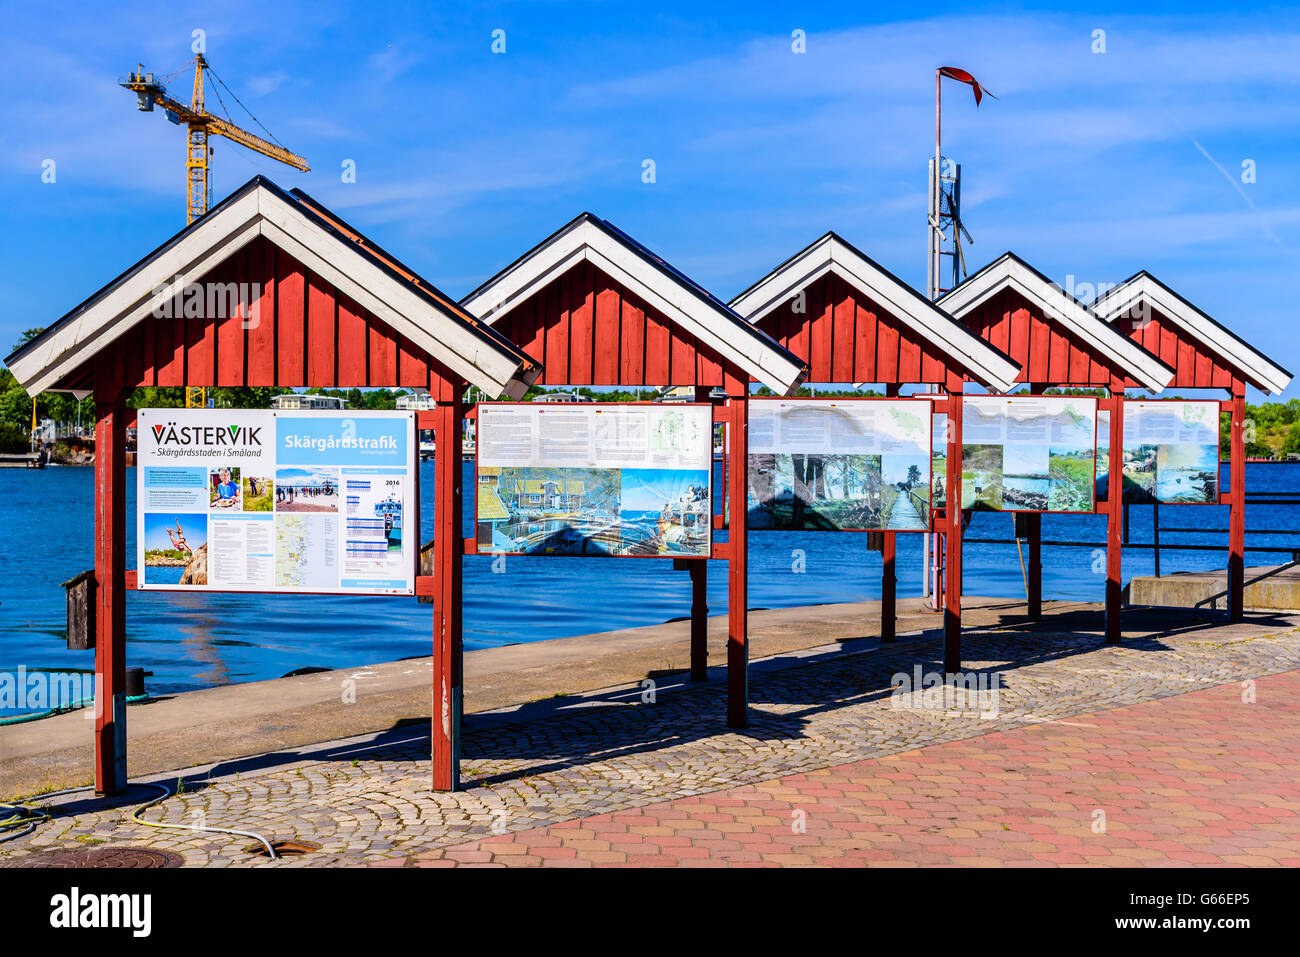 Vastervik, Sweden - June 19, 2016: Seaside information place with sections of notice boards on different structures. Tourist and Stock Photo